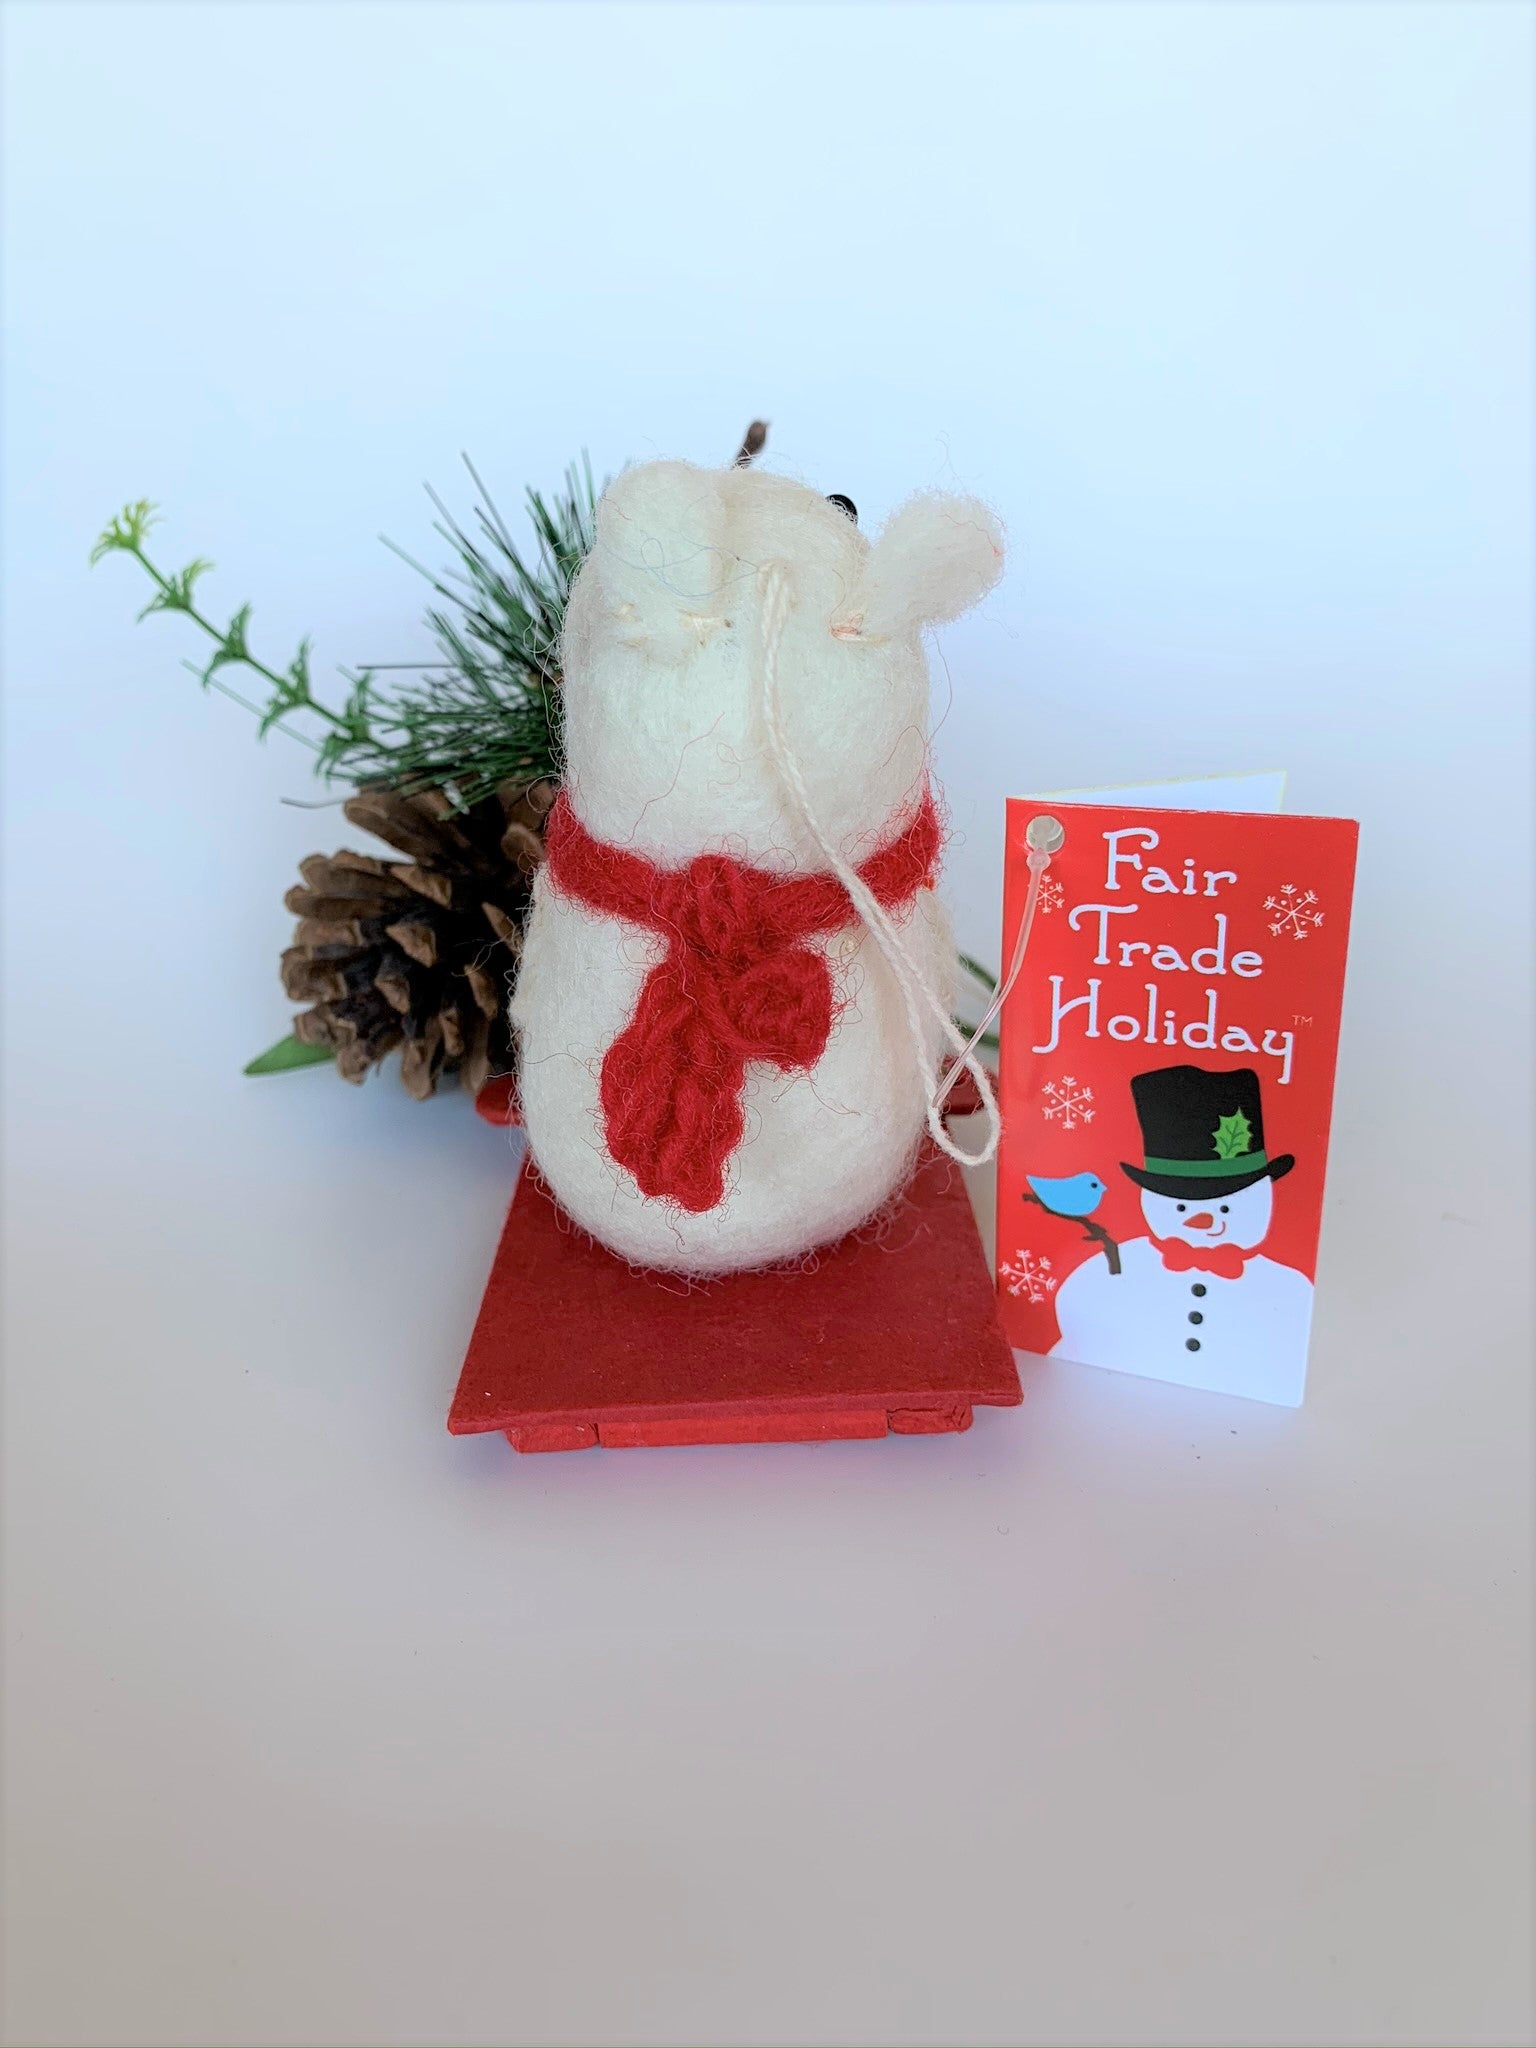 This is a back view of the sledding polar bear Christmas Ornament that is handcrafted (fair trade). The polar bear is made of 100% natural wool and the sled is handmade with paper that is hardened and feels somewhat like very thin wood and it is red. The bear is off-white with a tan belly, brownish-gray muzzle, black accents (paws, nose, etc.) and is wearing a red winter scarf. It is approximately 4.75"x3.5"x2.5". It comes with a fair trade holiday "to/from" tag to use if giving this as a gift.